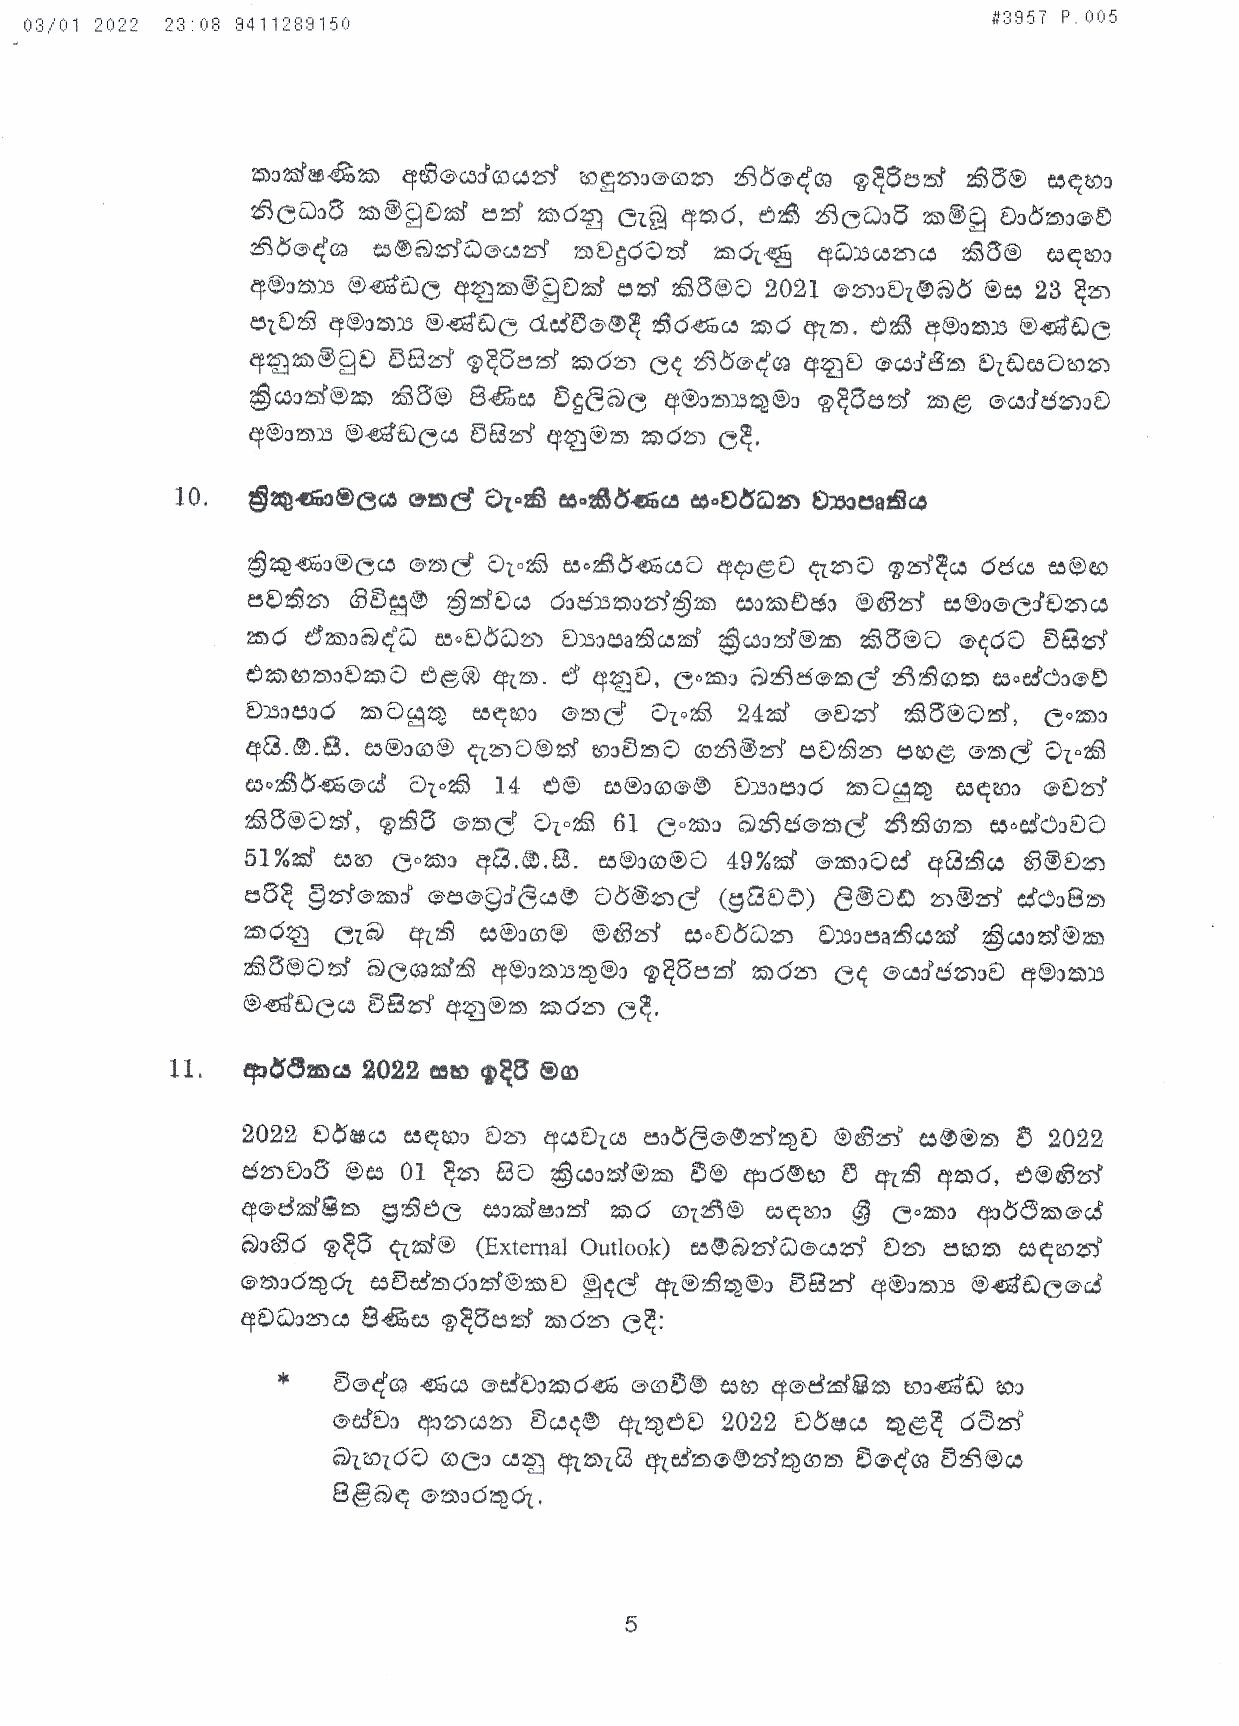 Cabinet Decision on 03.01.2022 page 005